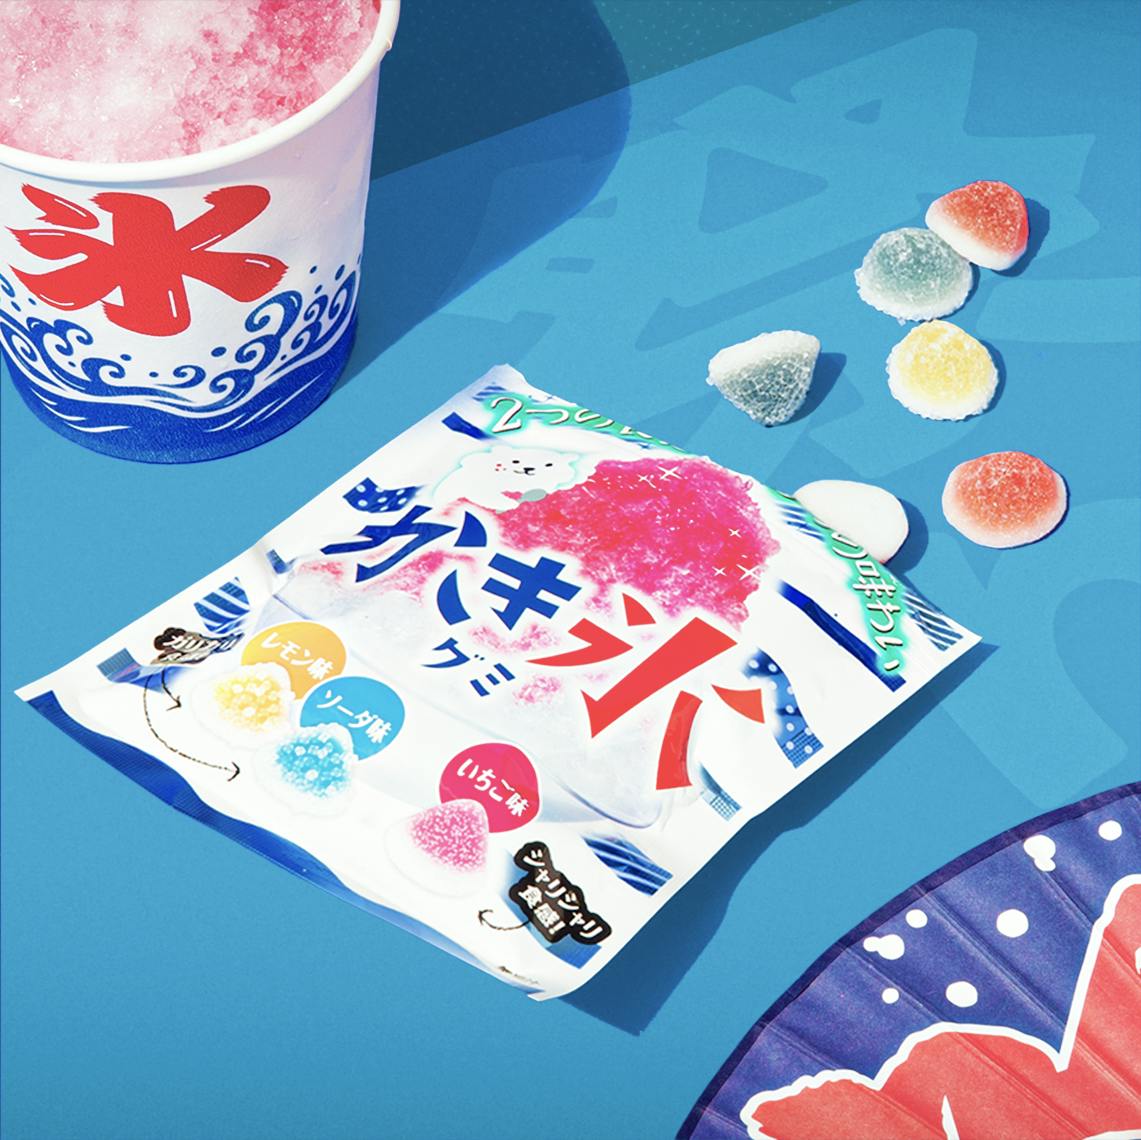 Kakigoori Gummies sit on a blue background, surrounded by Japanese summer festival motifs.